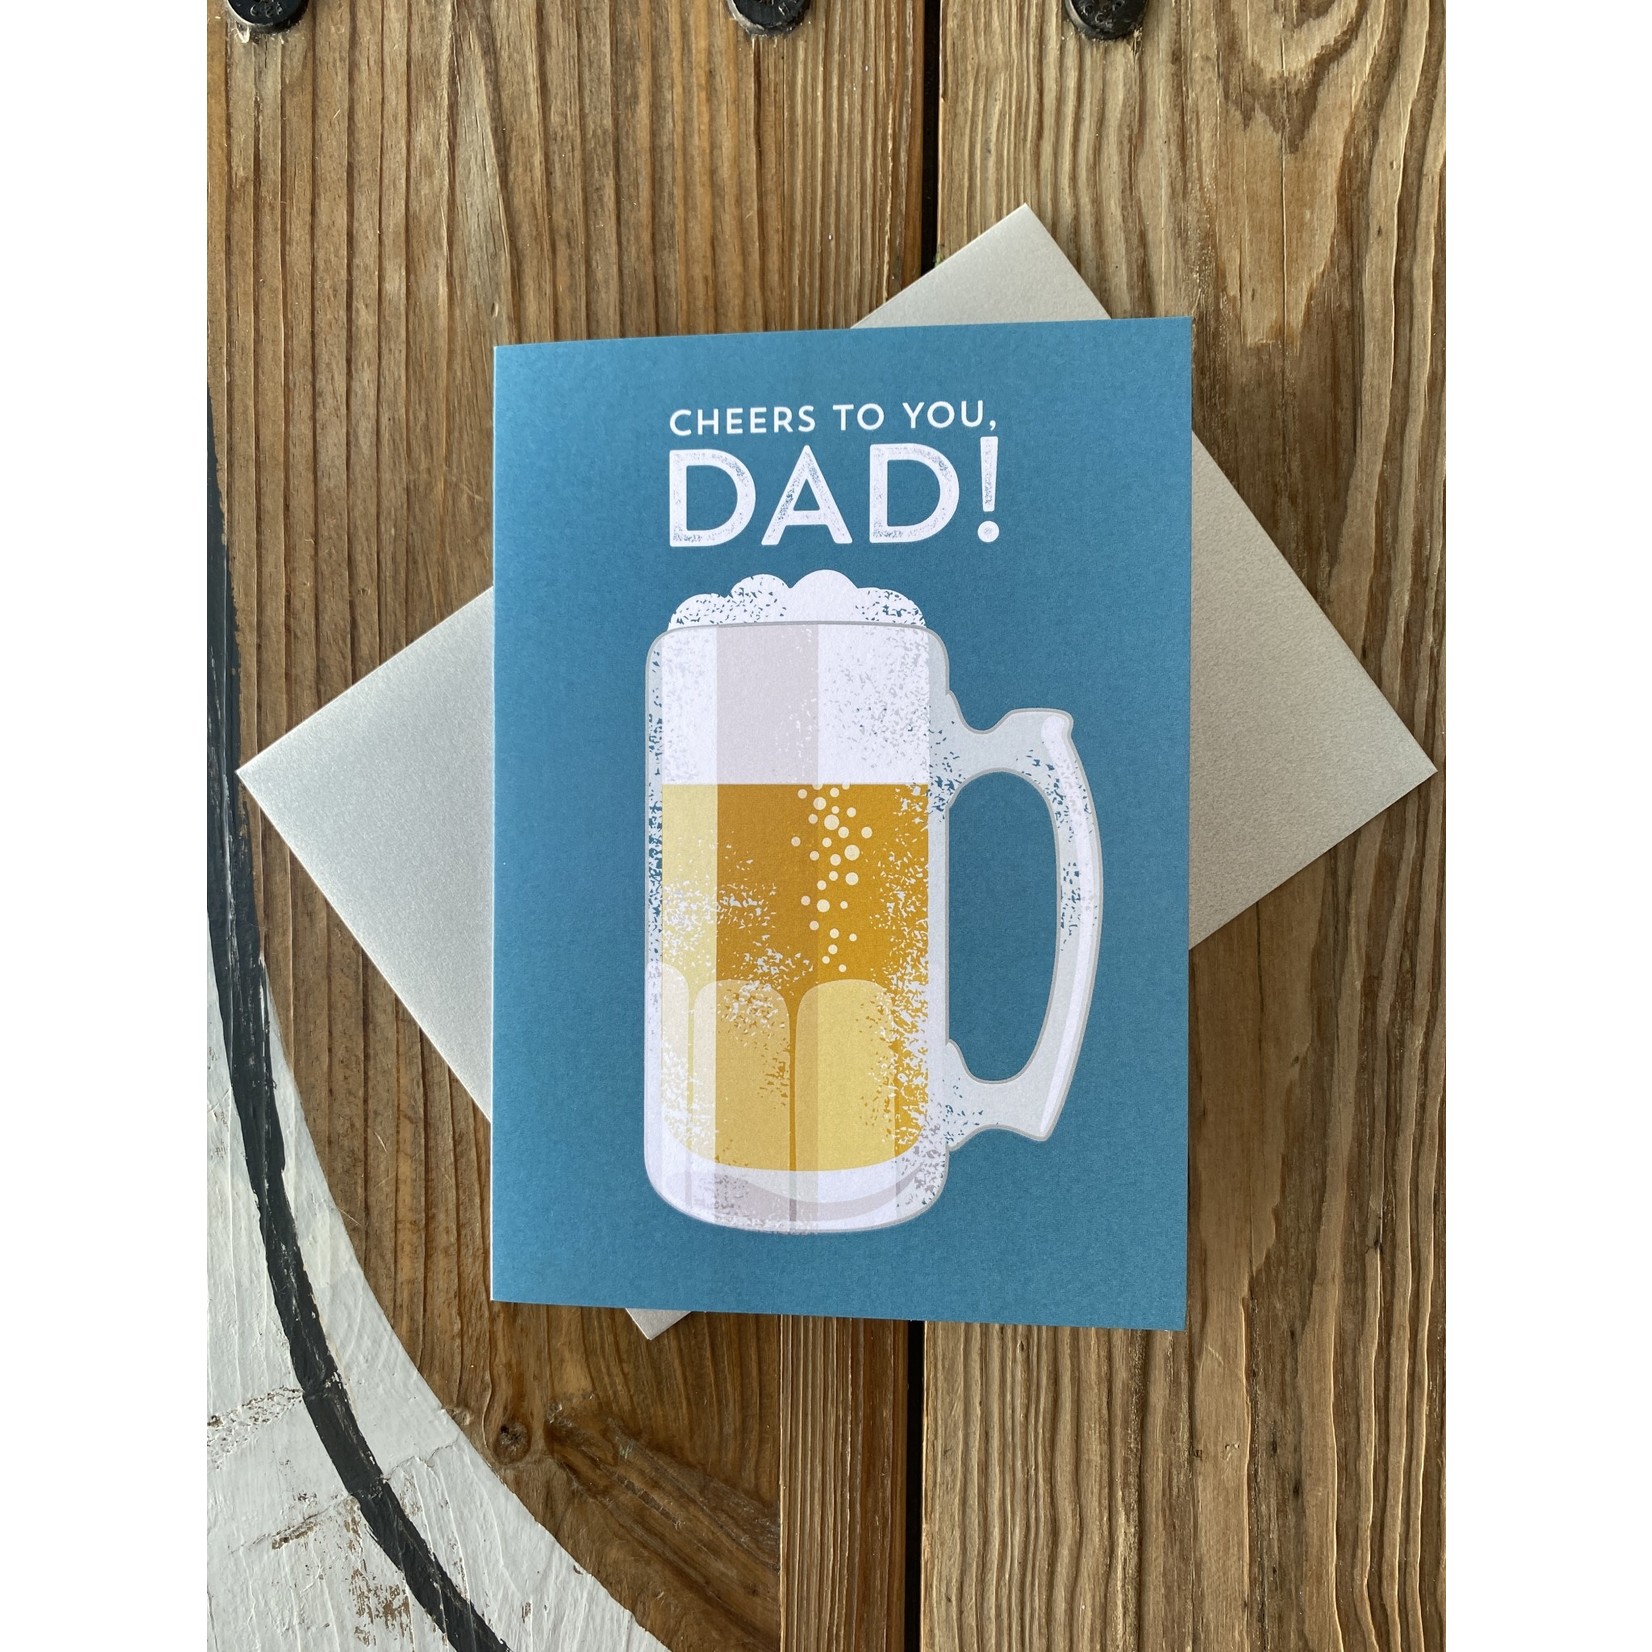 card that says "cheers to you dad" with beer on it